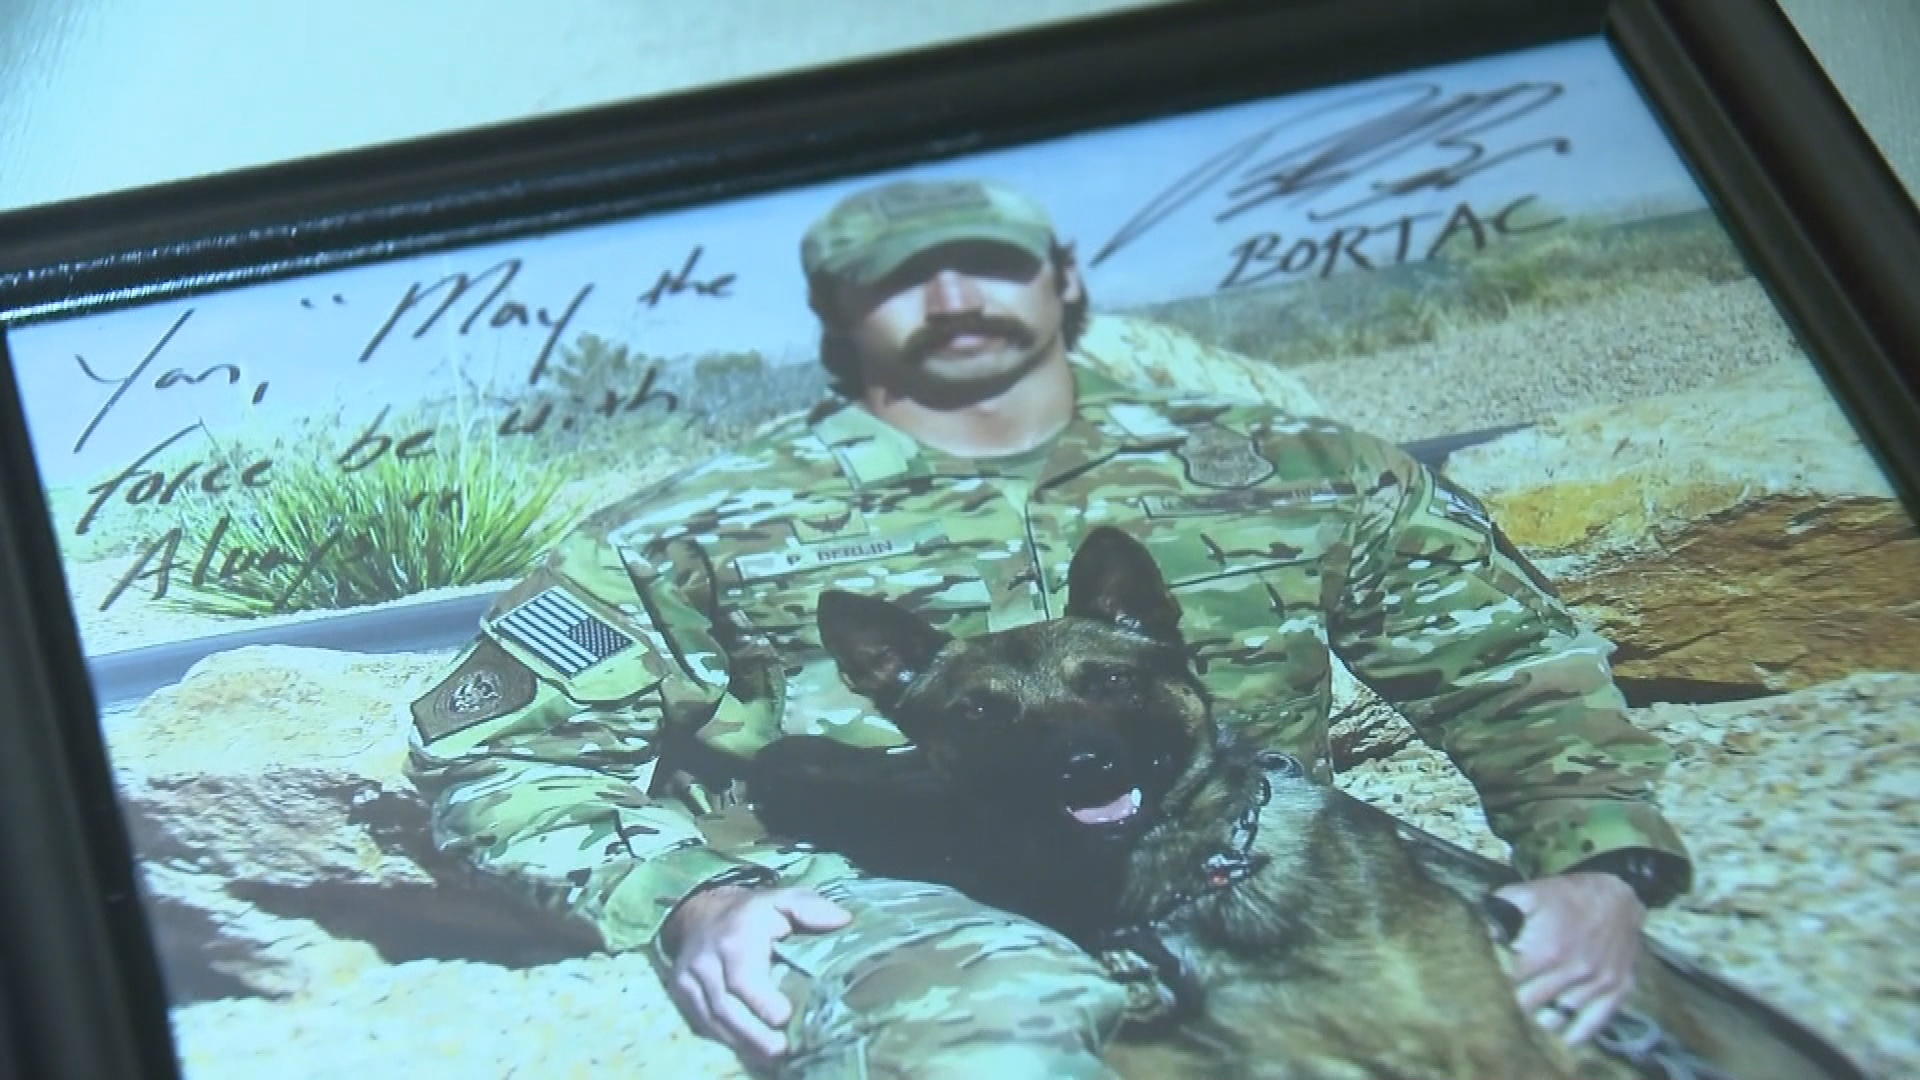 yoda-us-customs-and-border-patrol-k-9-signed-photo-gifted-to-son-of-victim-killed-by-danelo-cavalcante-in-phoenixville-pa.jpg 